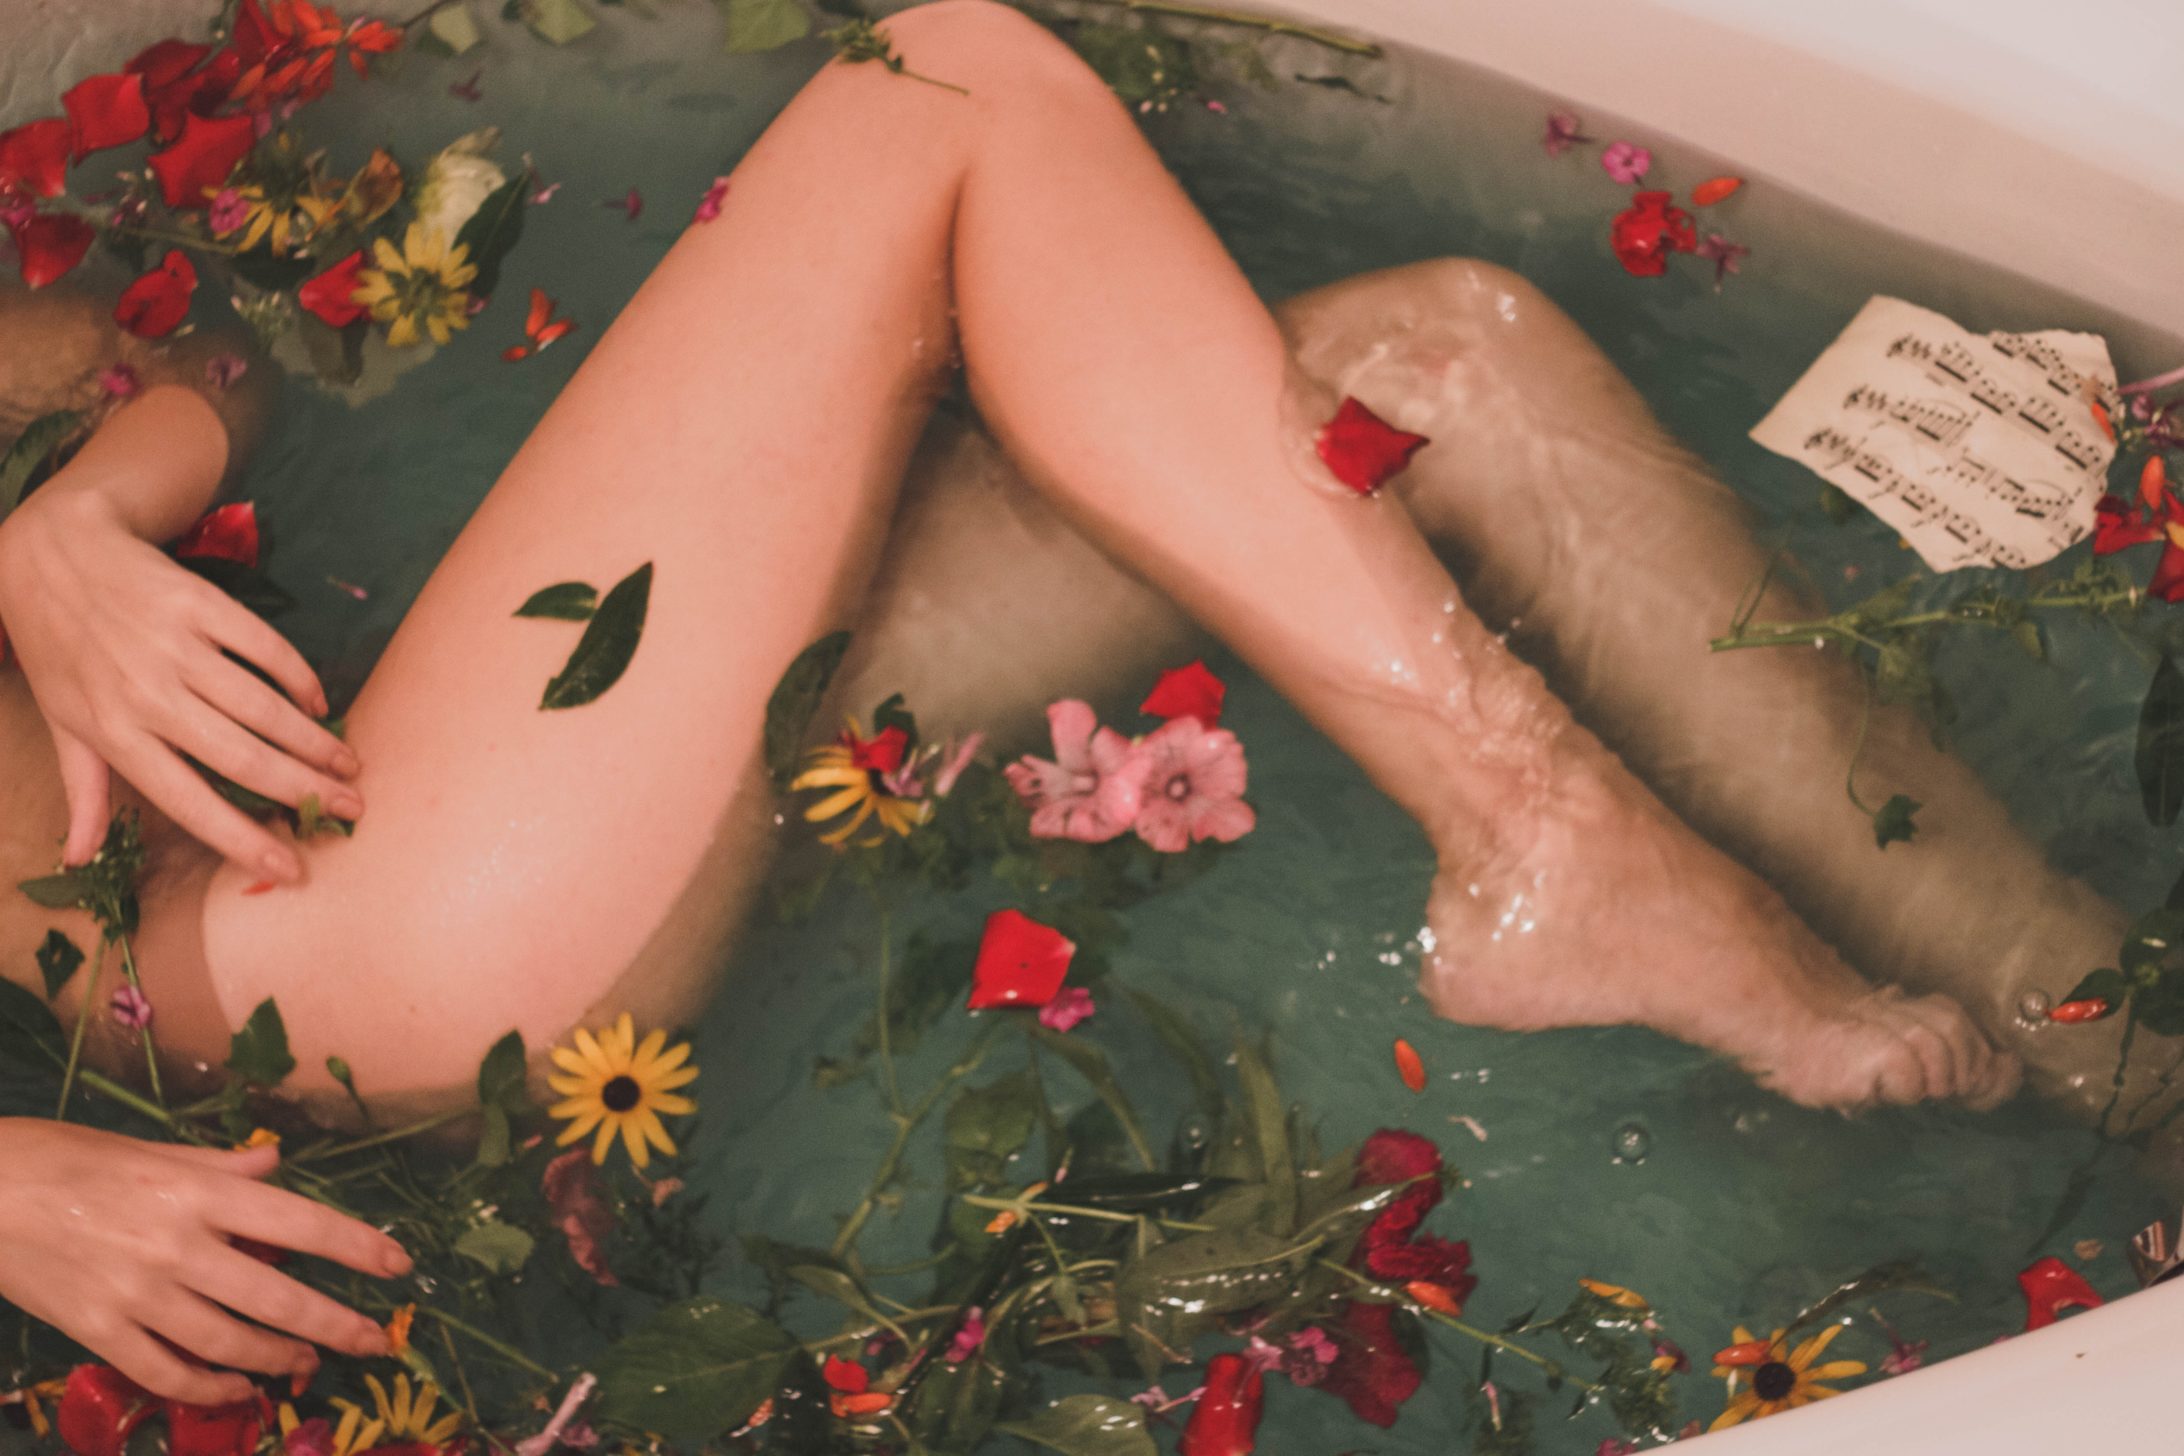 woman in a bath, with flowers and leaves